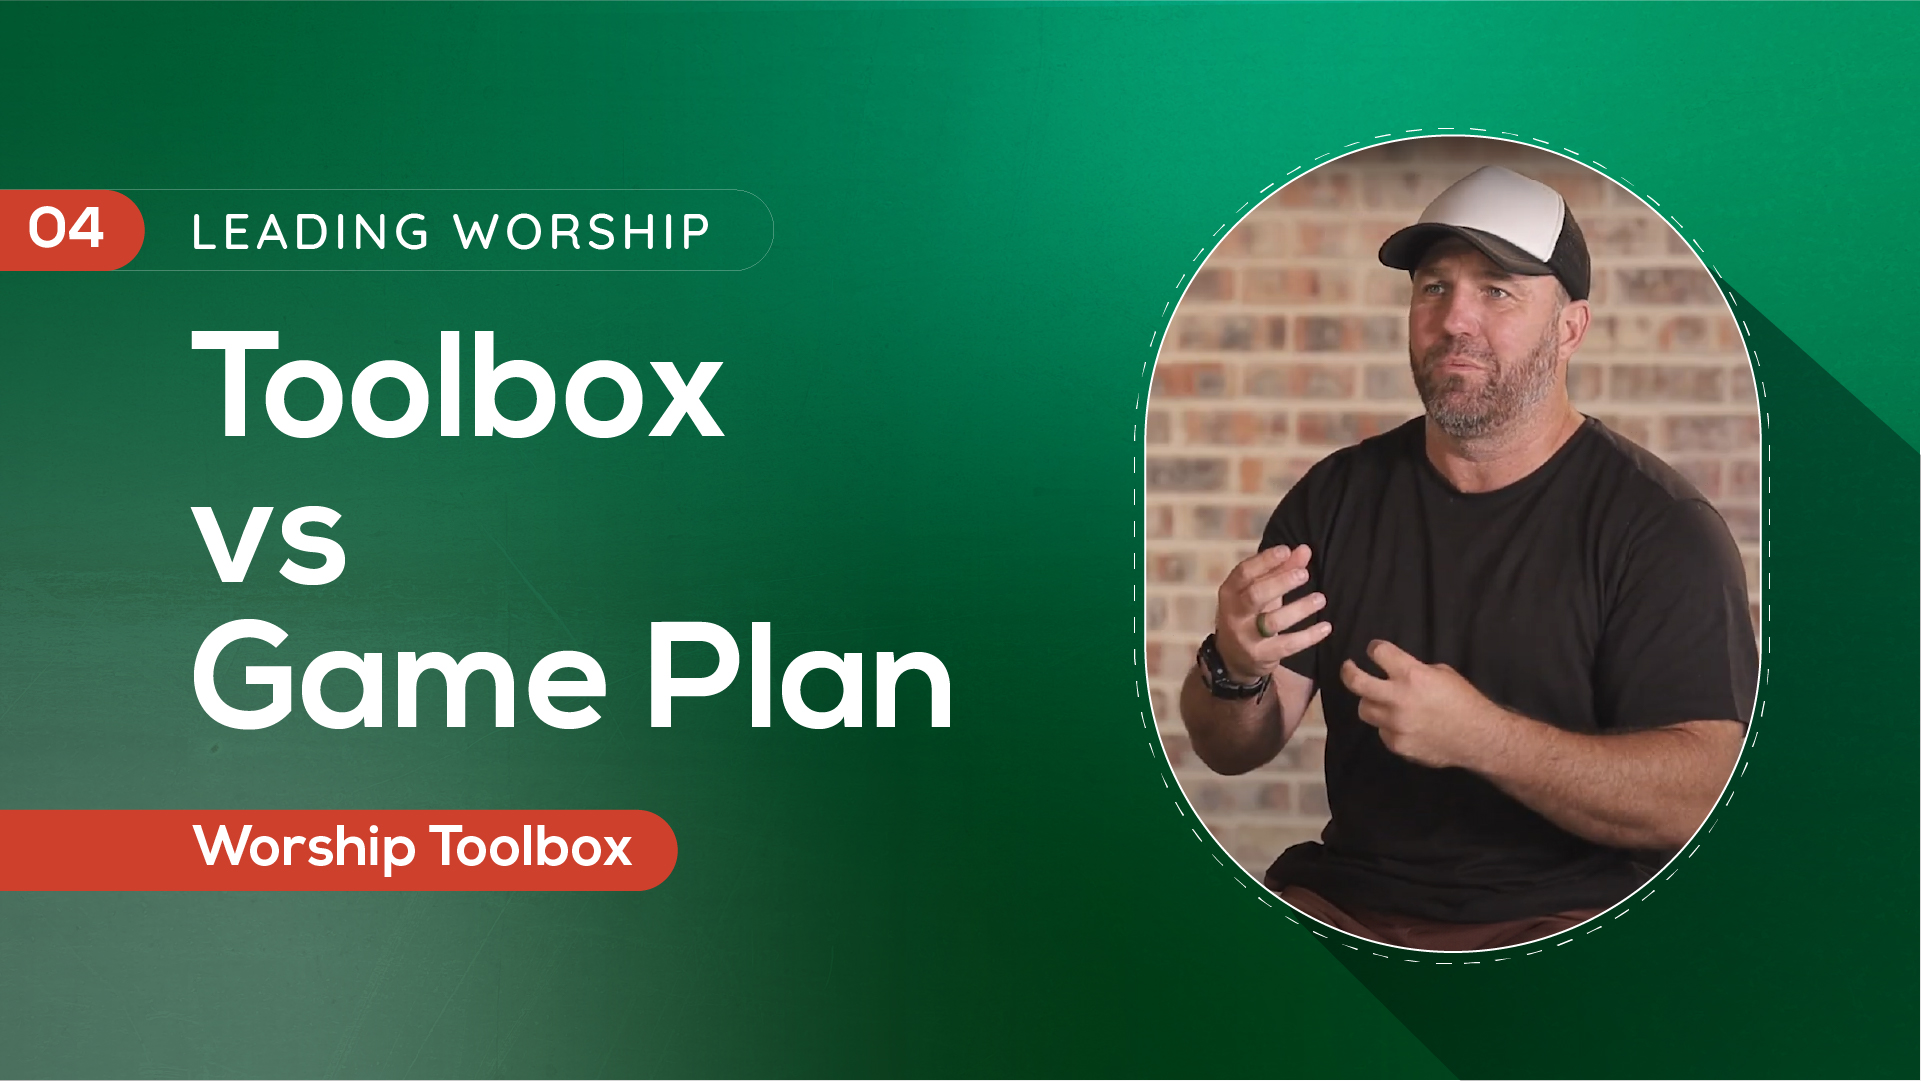 Video image for ‘Toolbox vs Game Plan’ about Spirit vs worship song list